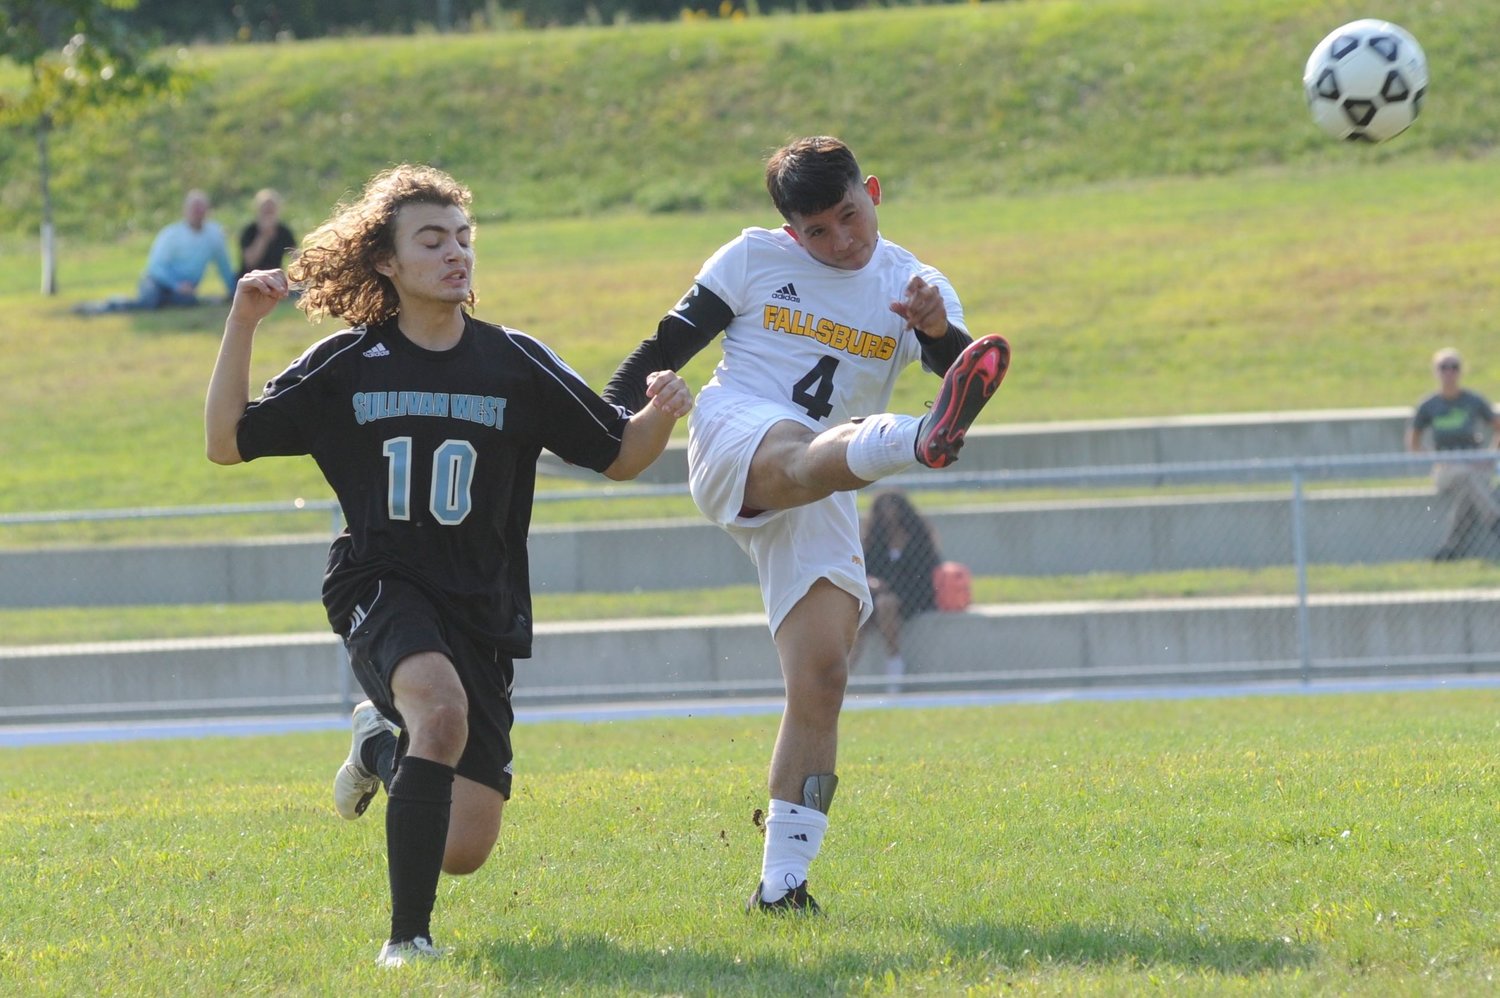 Action, reaction. Sullivan West’s Aoleces Jimenez reacts to a play by the Comets’ Mario Martinez.